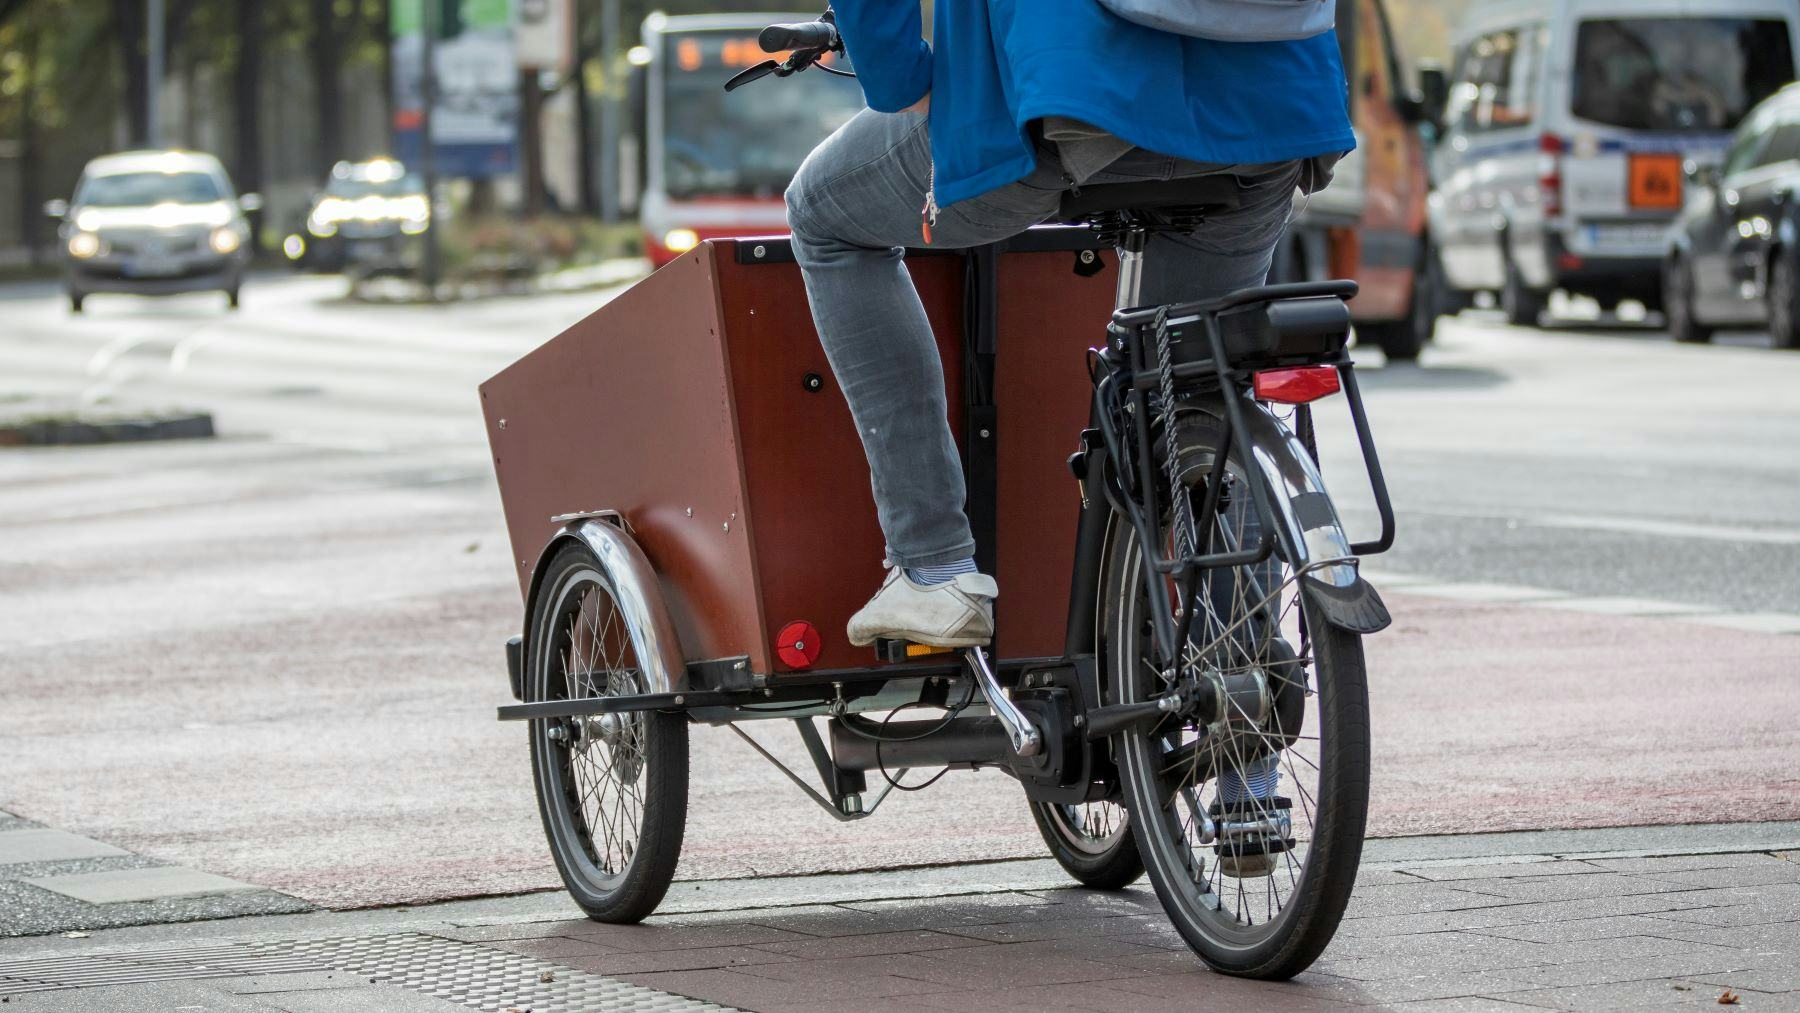 German industry association ZIV is now chairing the Cargobike working group which represents the segment on a European level. – Photo Shutterstock